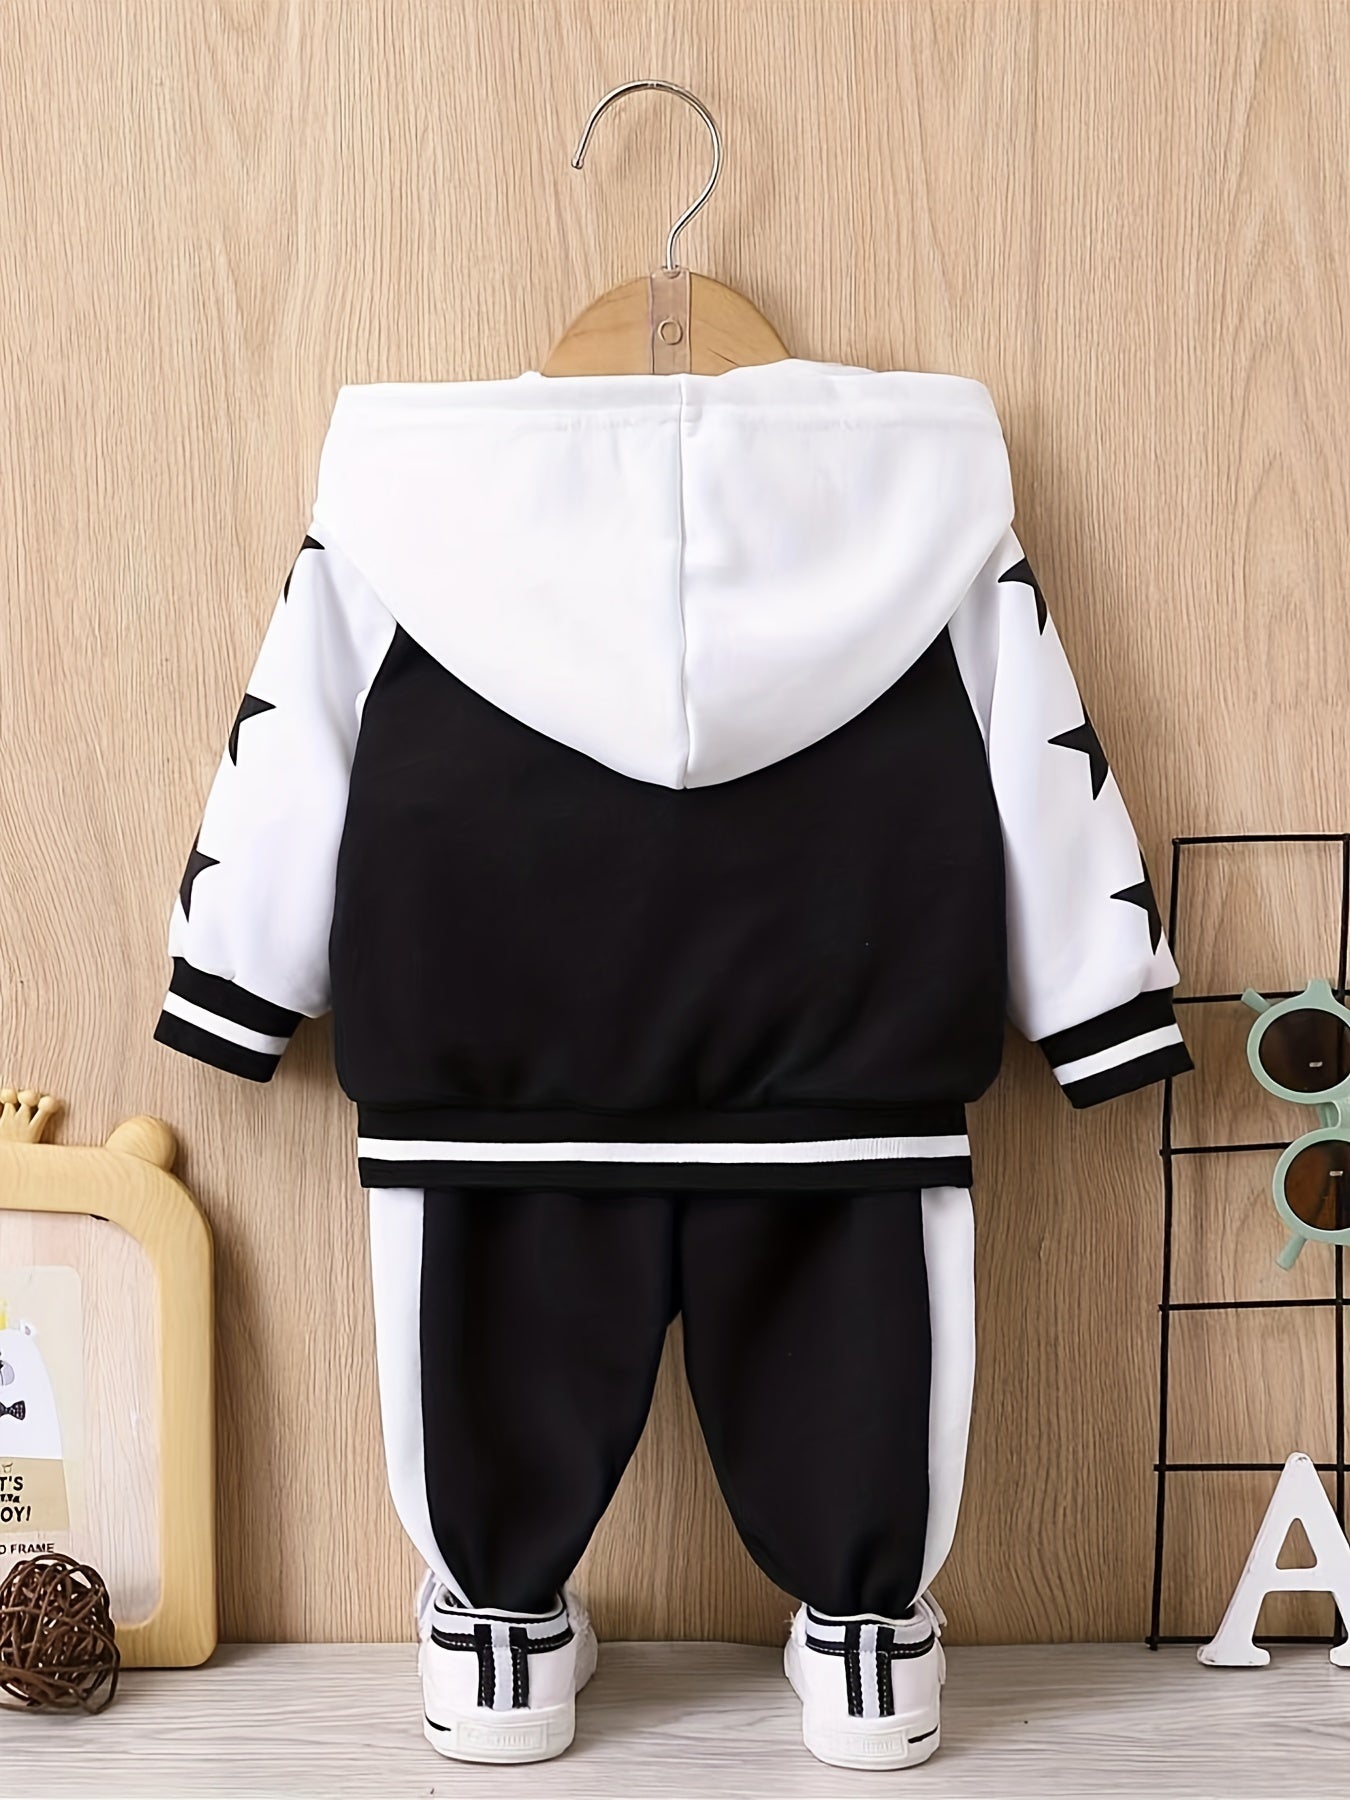 Toddler Baby Trendy A Sign Graphic Color Block Outfits, Warm Hooded Baseball Jacket Coat Pants Casual Set